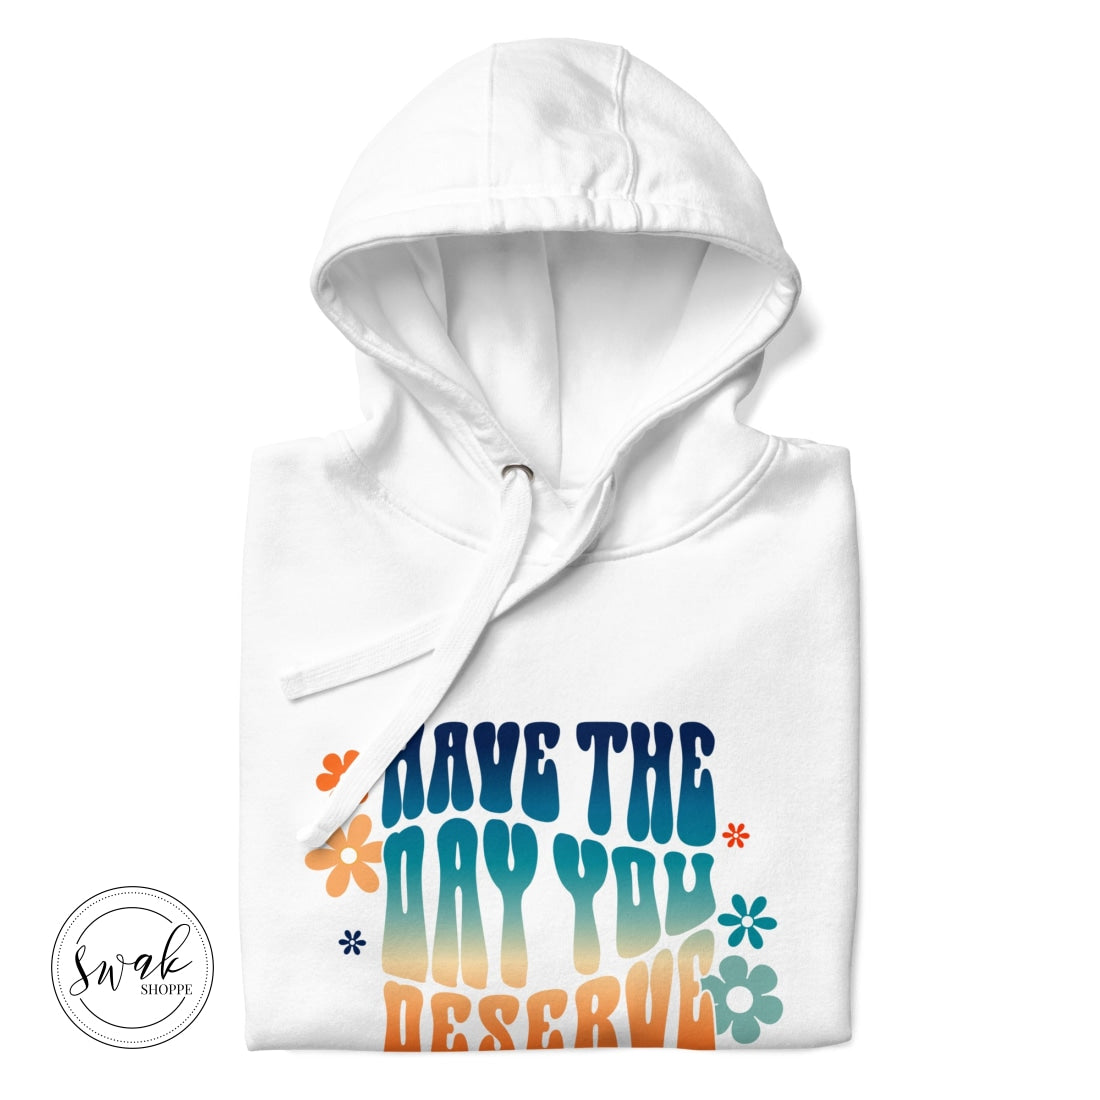 Have The Day You Deserve Groovy Retro Desert Unisex Hoodie